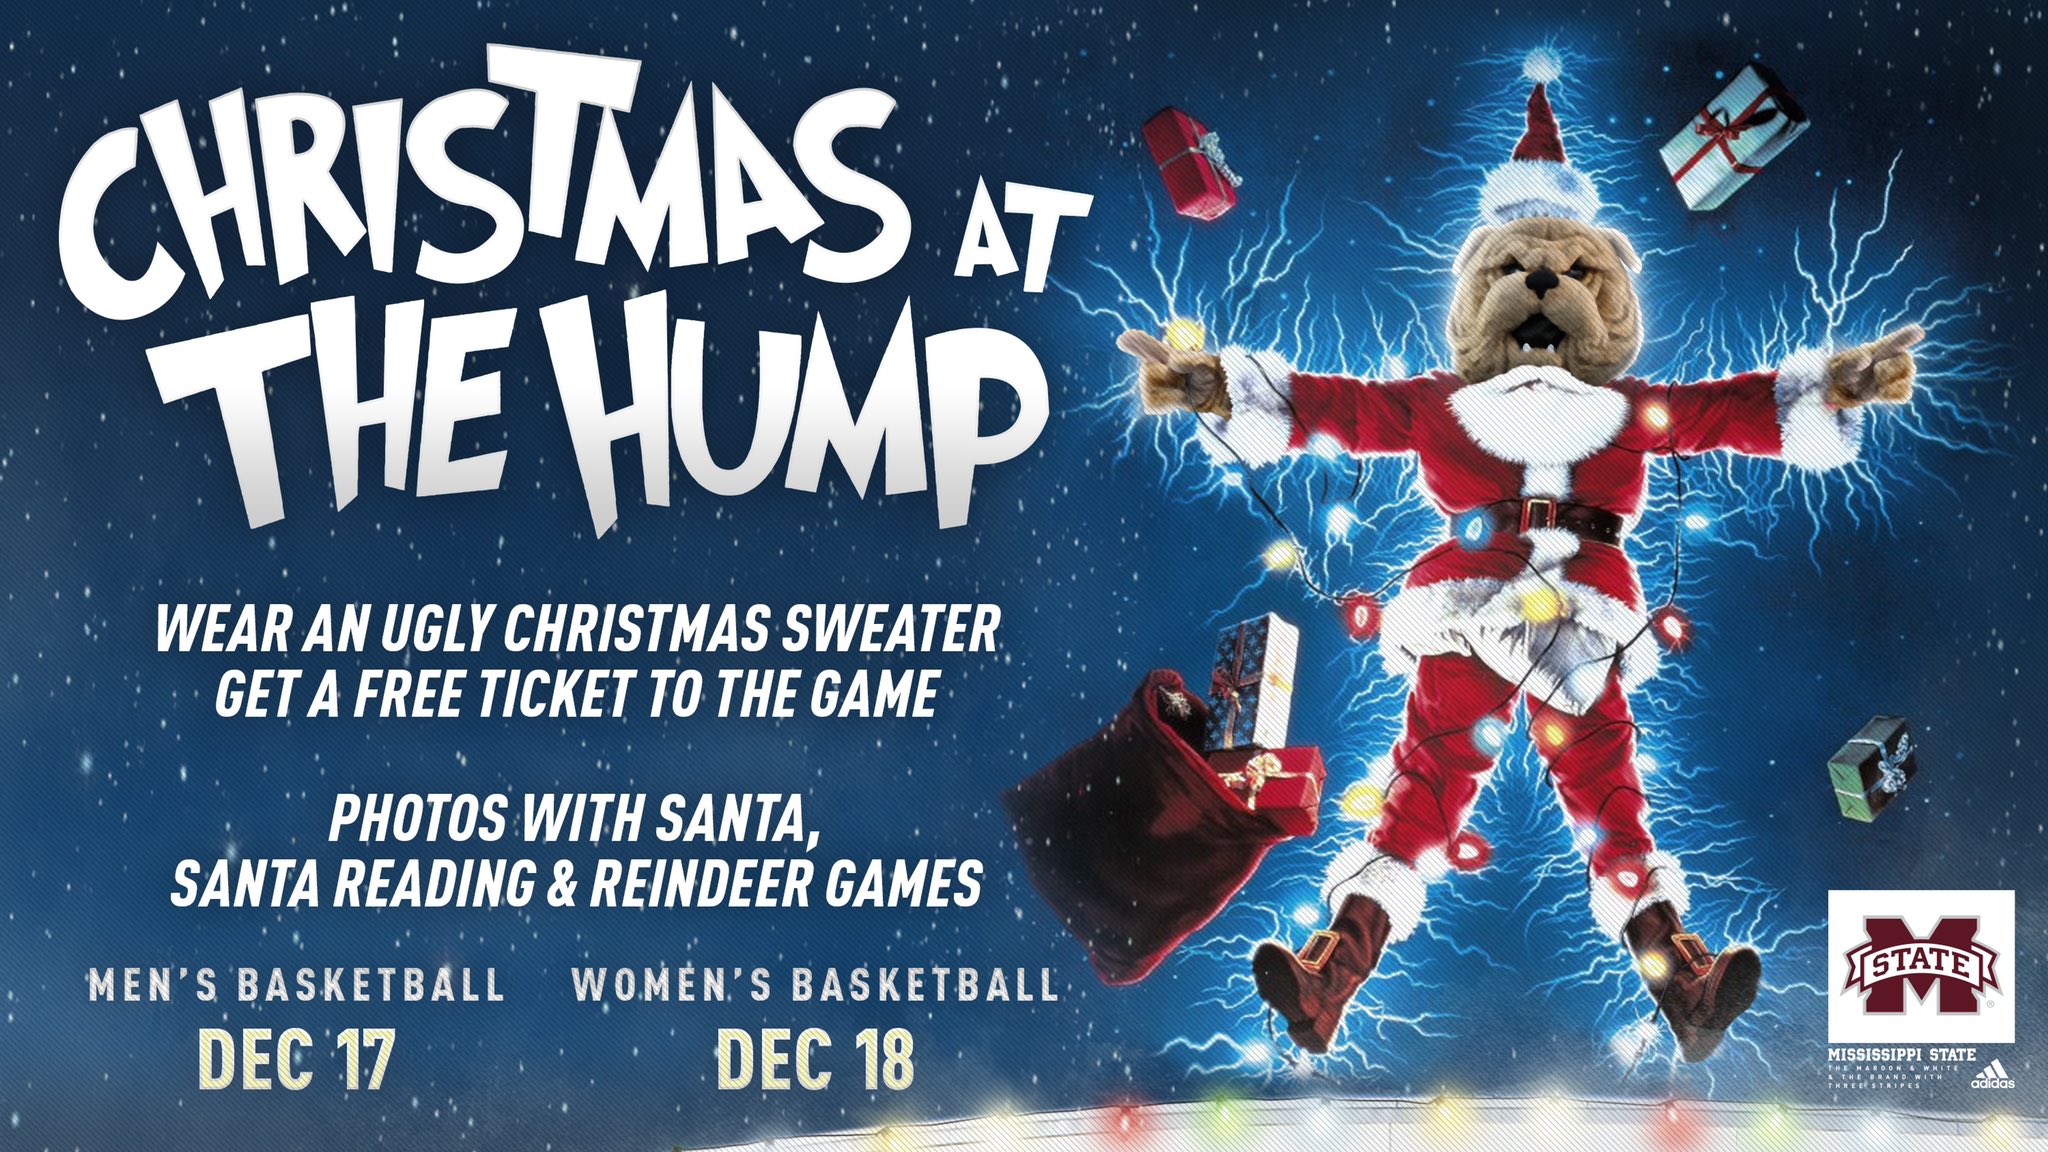 Christmas at the Hump graphic with image of Bully in a Santa suit wrapped in Christmas lights